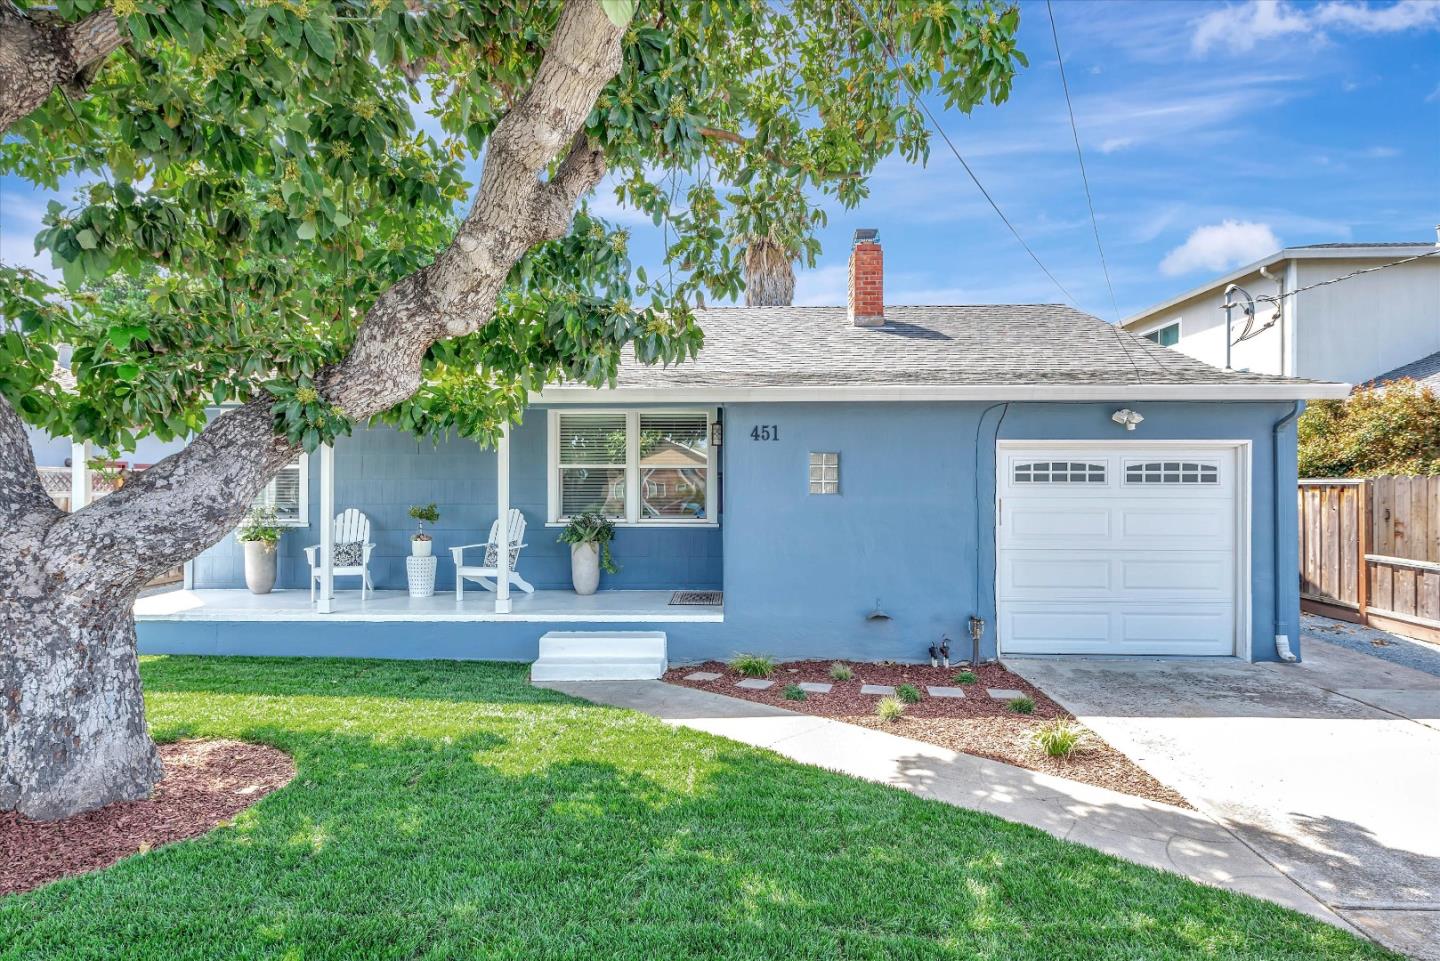 Photo of 451 Halsey Ave in San Jose, CA